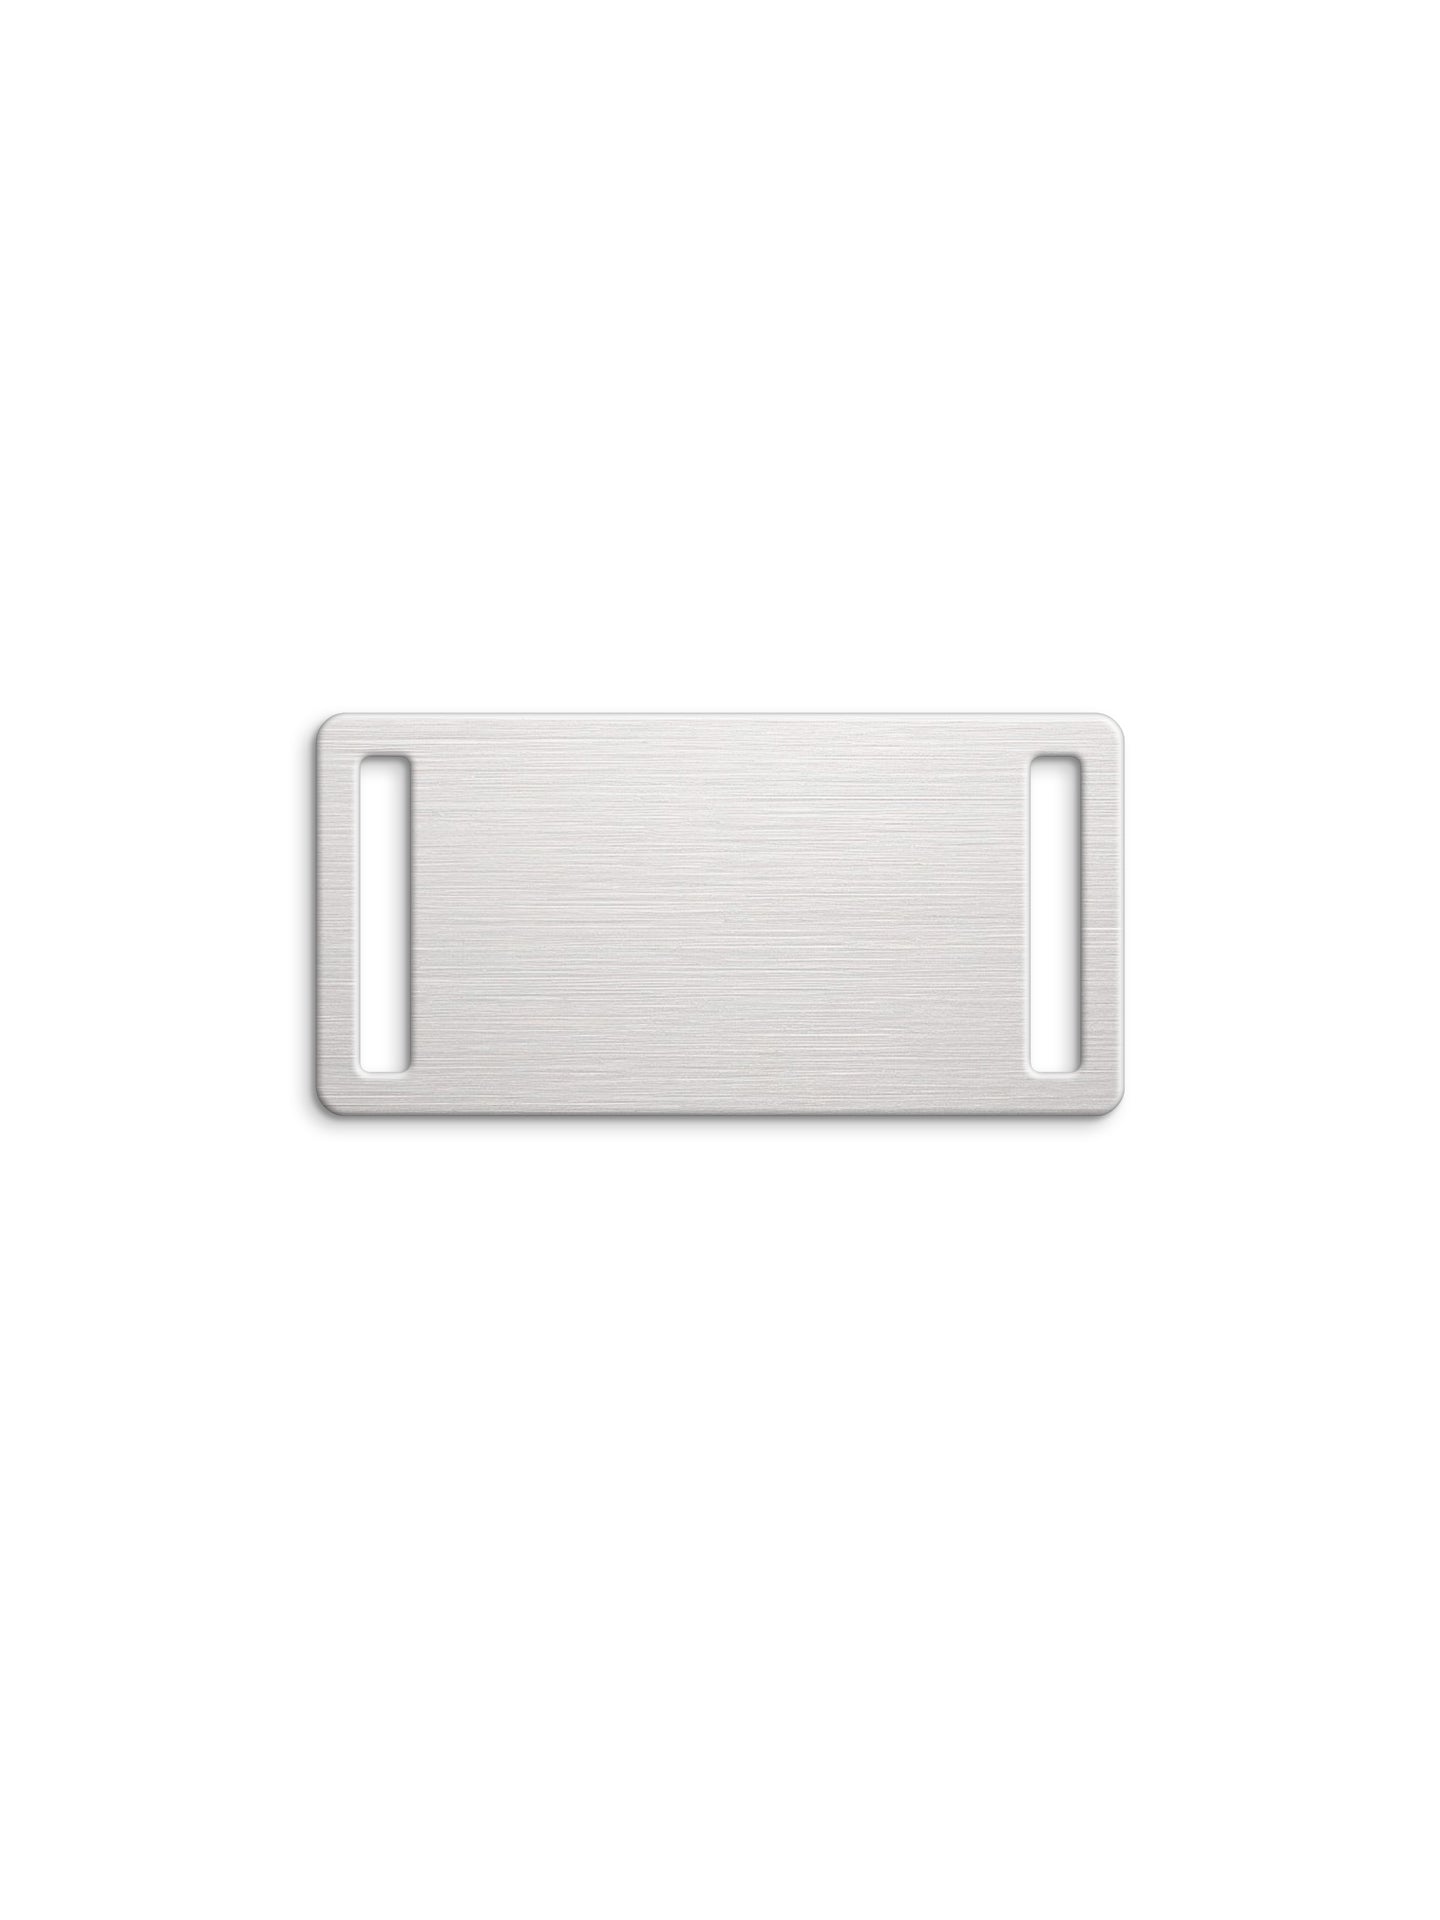 ID Tag Steel curved with band